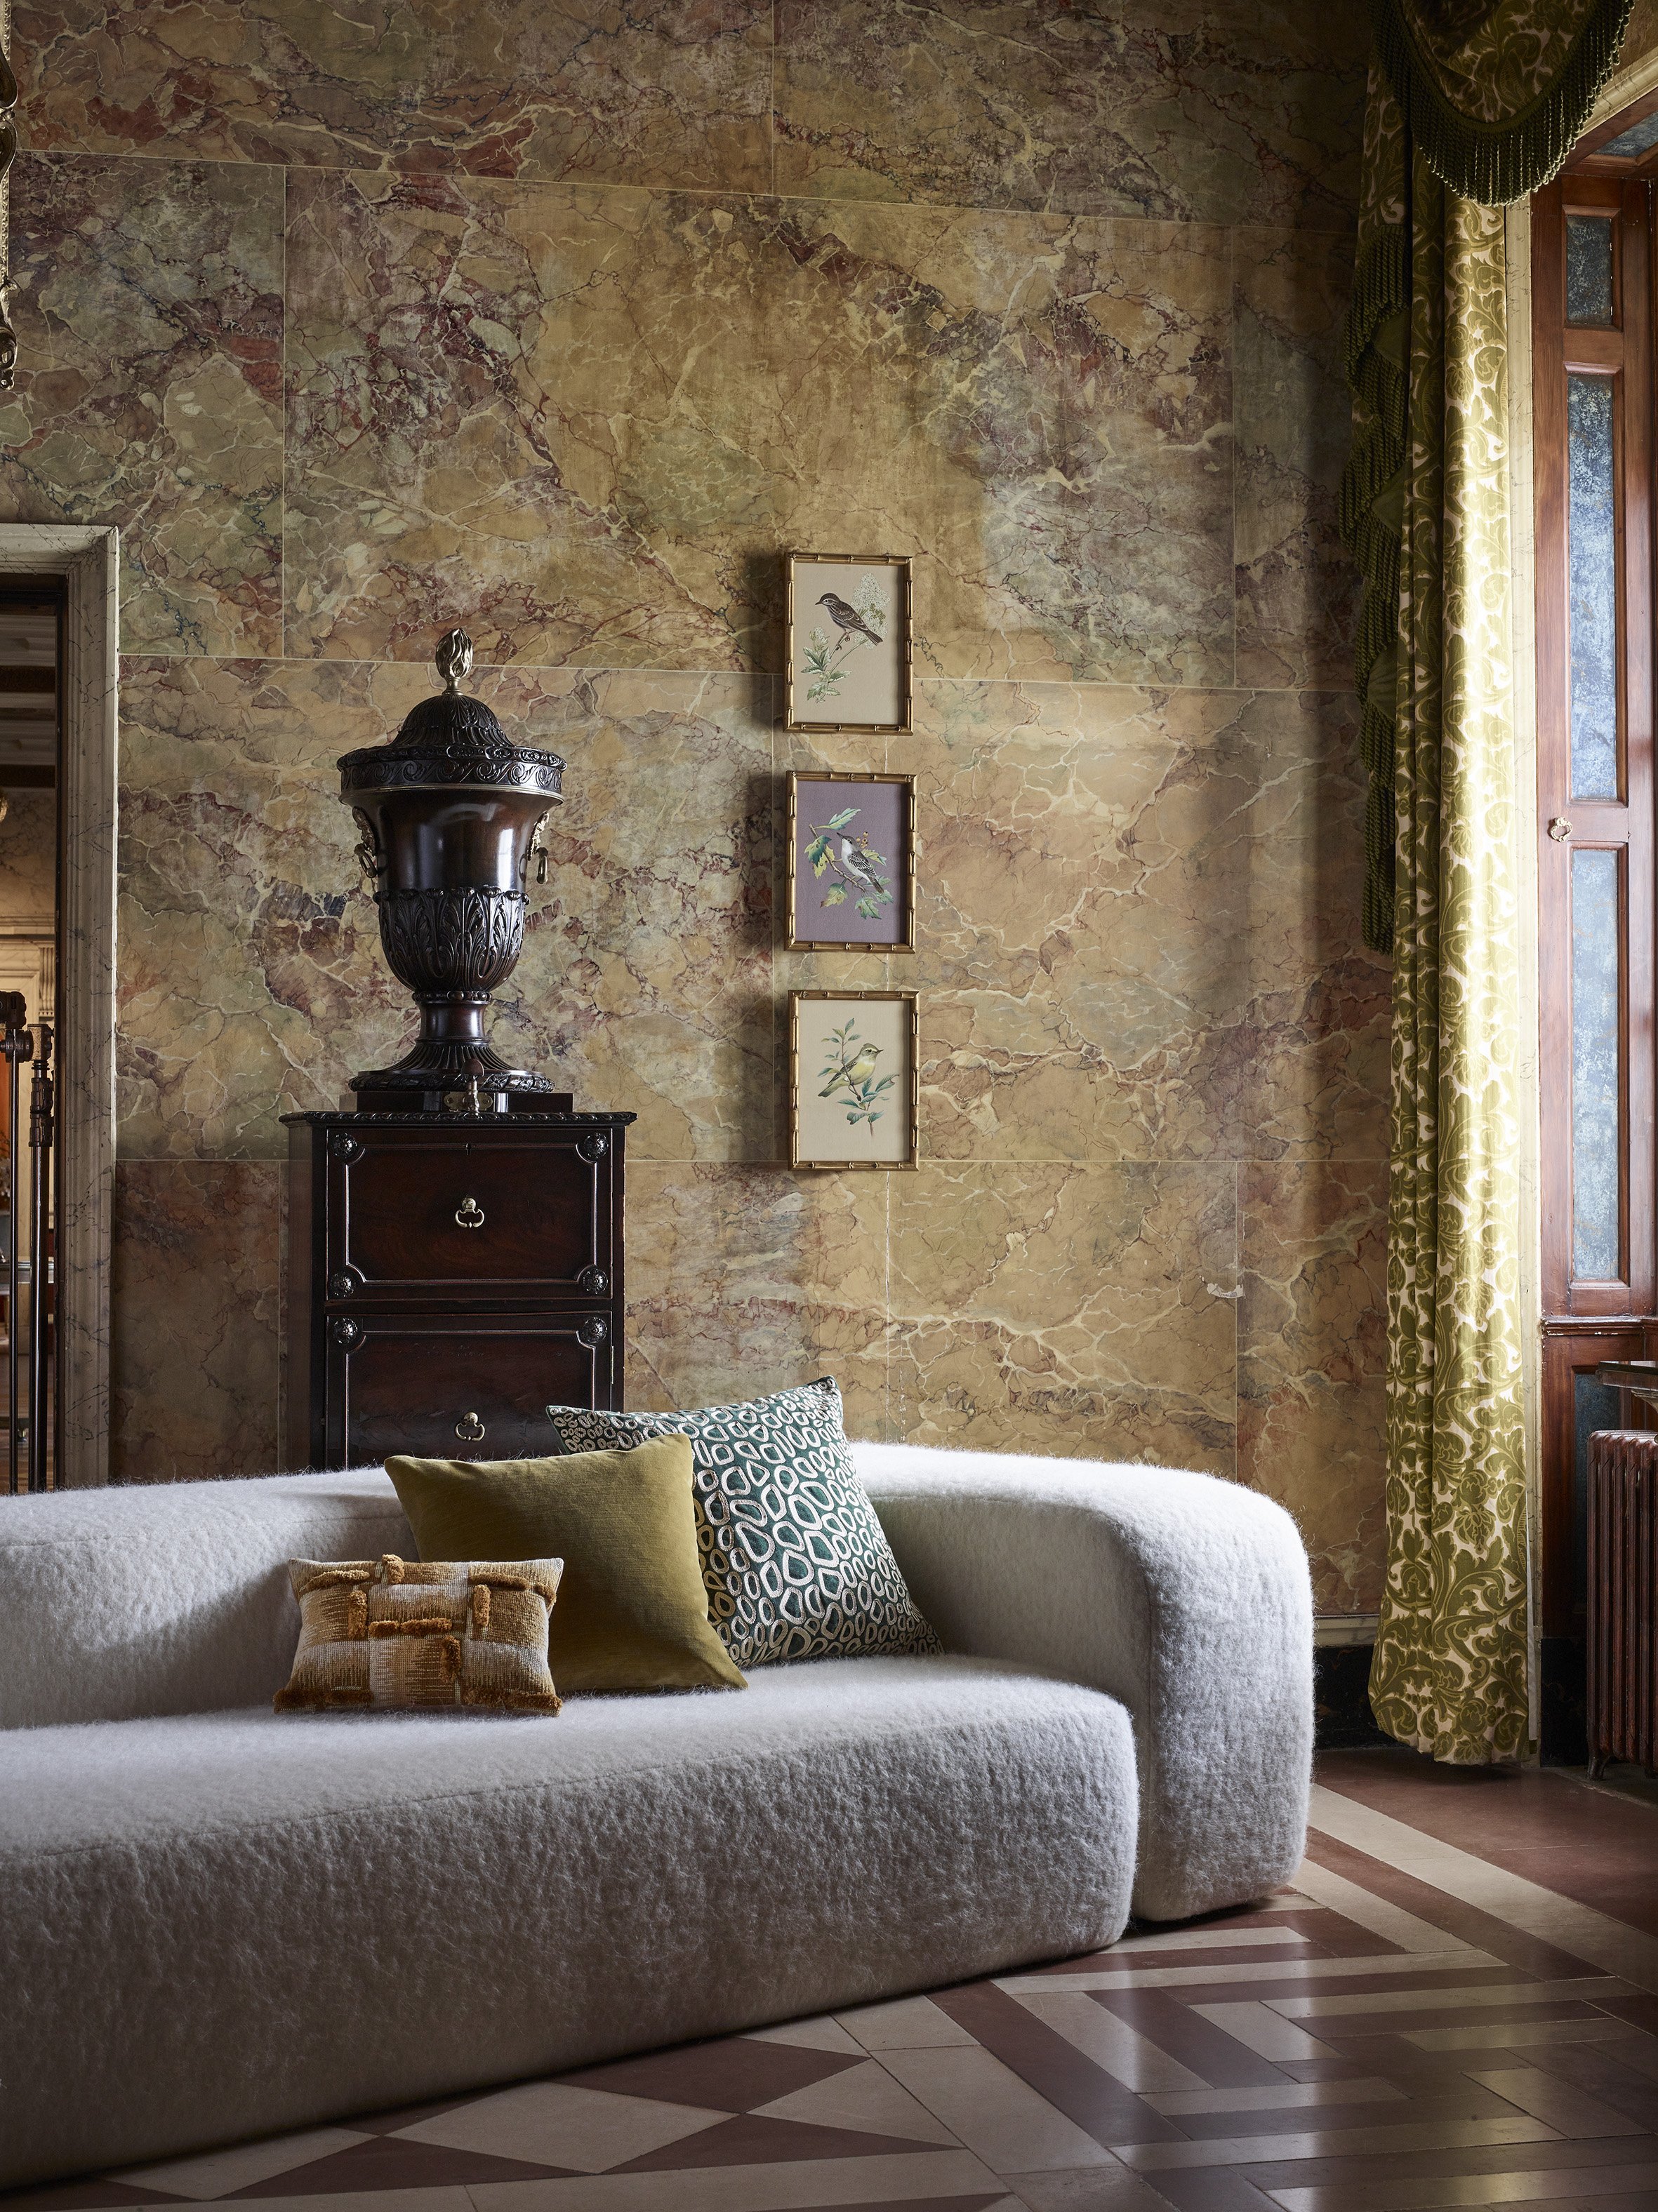 Lalique and Fromental Collaborate on a Stunning Wallpaper Design  Galerie